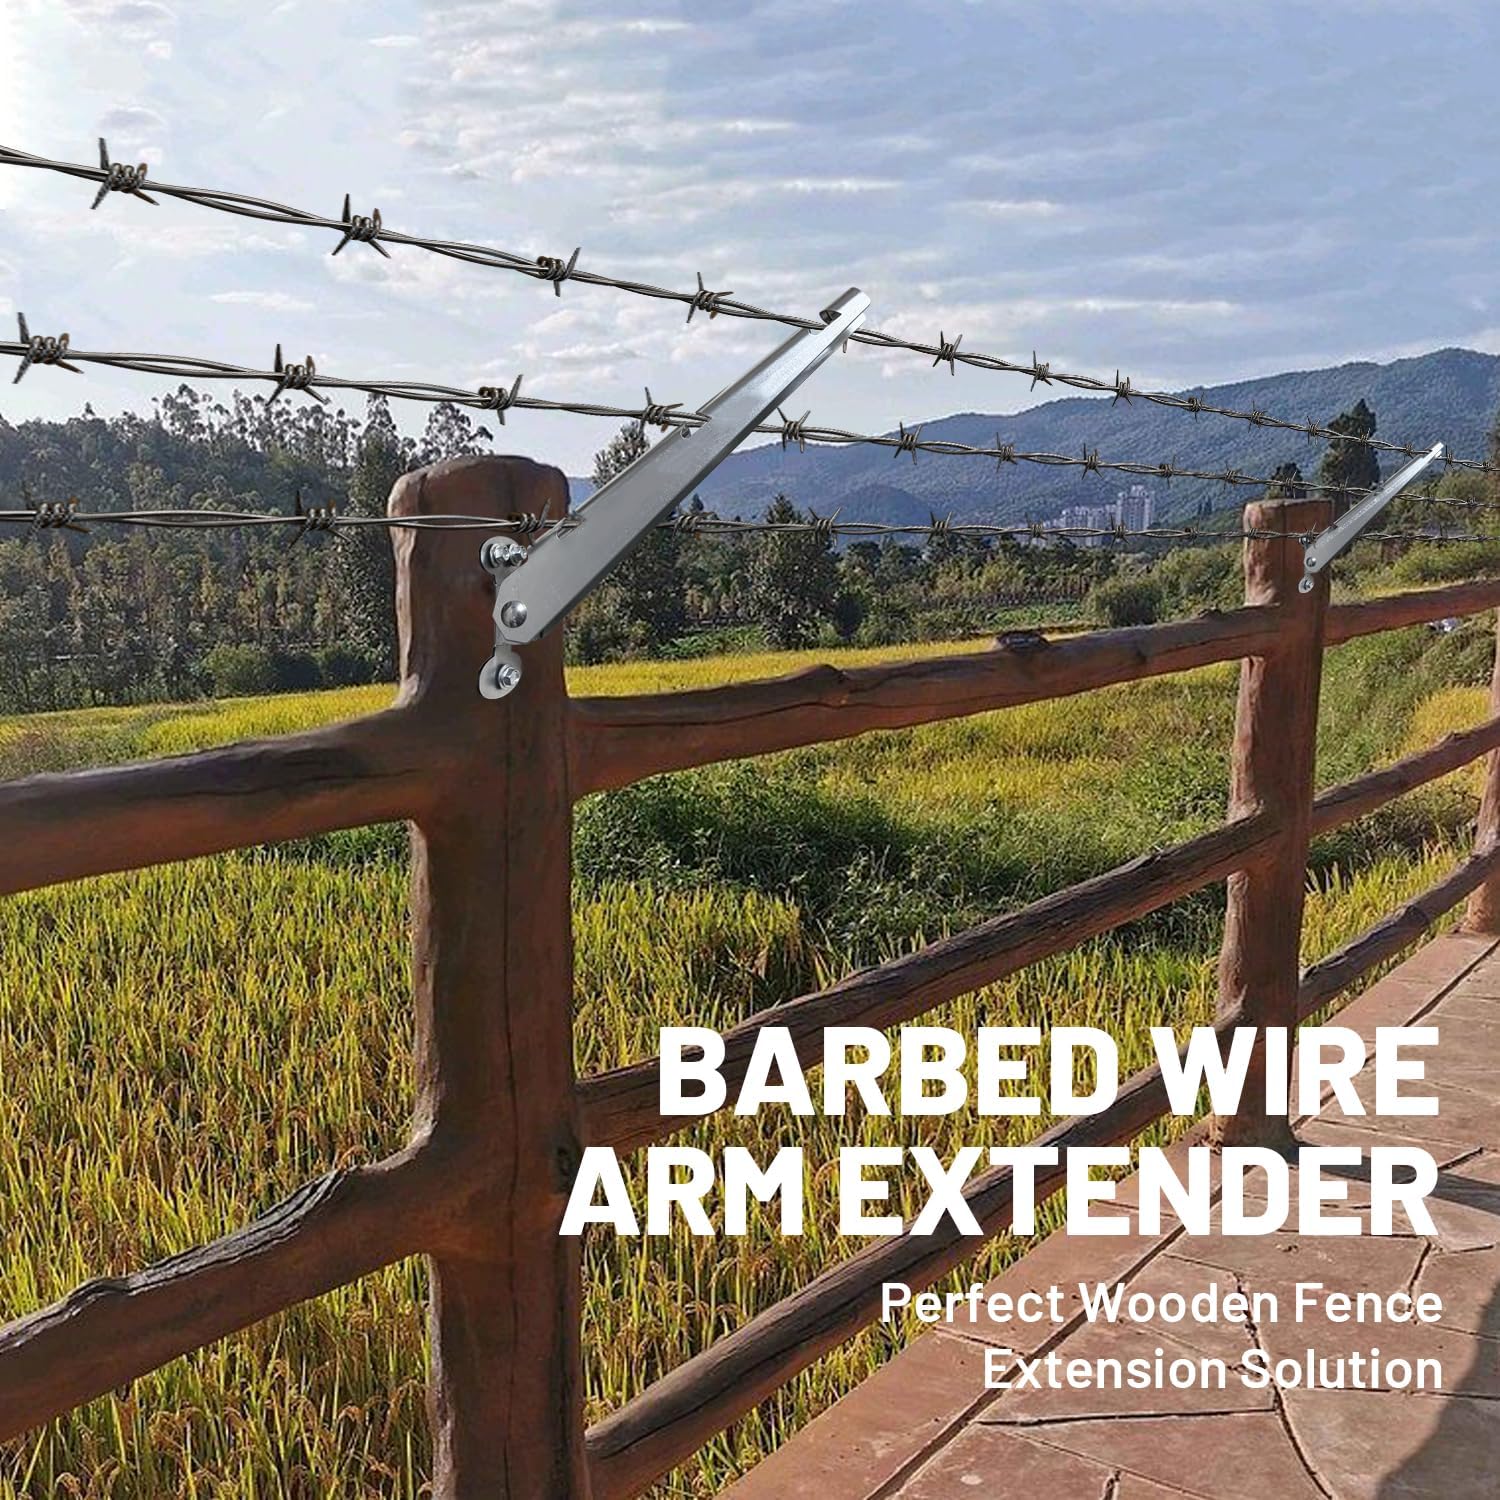 10 Pcs Barbed Wire Arm Extender for Wooden Fence Post